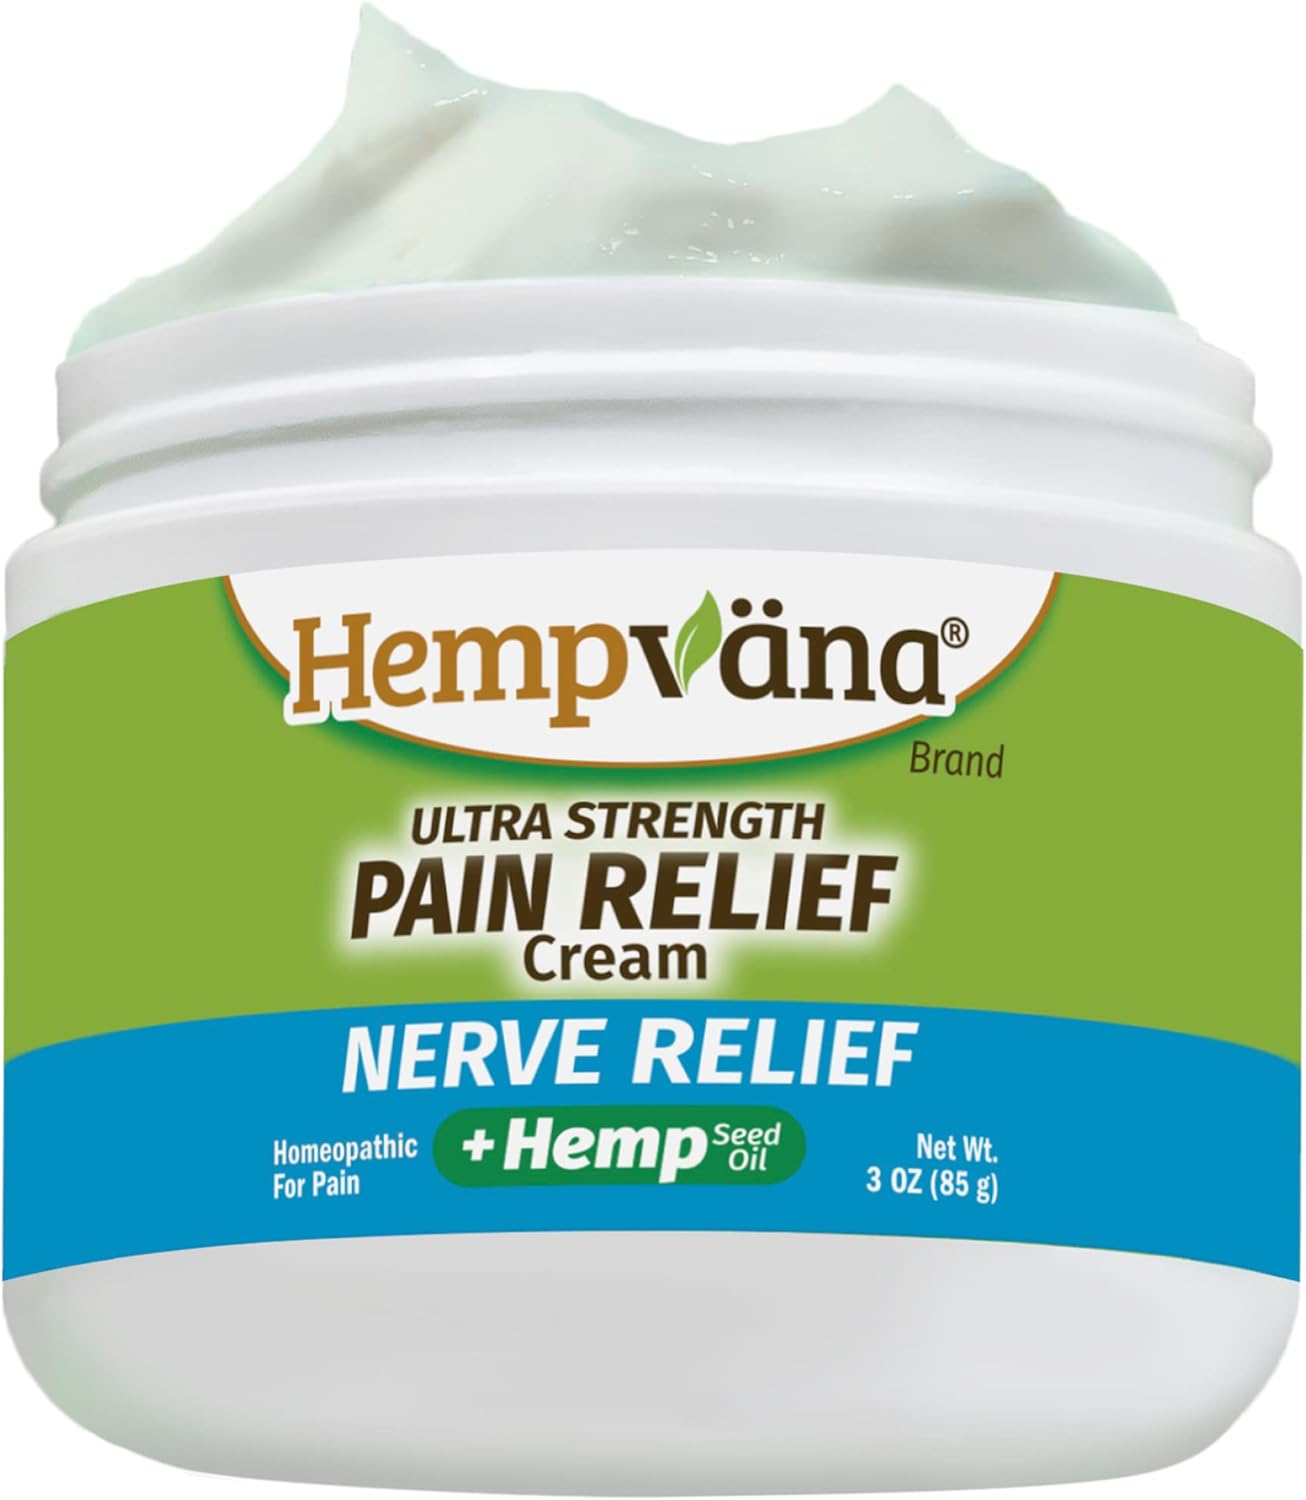 Hempvana Ultra-Strength Nerve Relief Cream with 100% Pure Hemp Seed Oil, As-Seen-On-TV, Fast-Acting for Irritated Nerves, Homeopathic, Targets Discomfort, Absorbs Quickly, Non-Greasy, 3 oz Jar